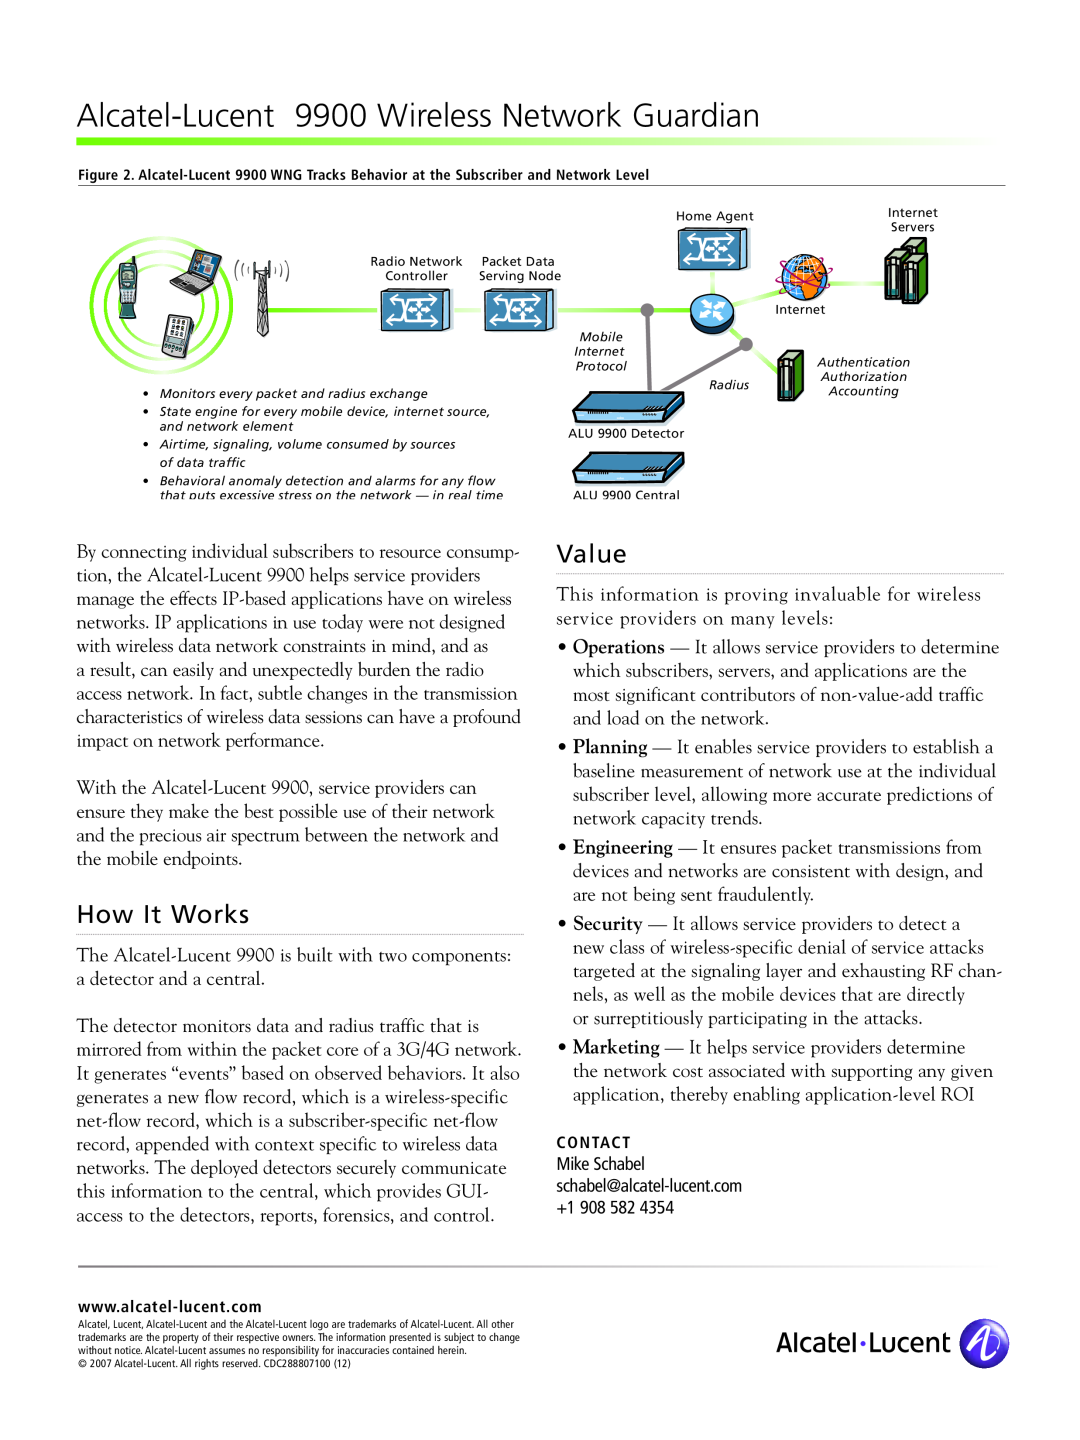 Alcatel Carrier Internetworking Solutions manual Alcatel-Lucent 9900 Wireless Network Guardian, How It Works, Value 